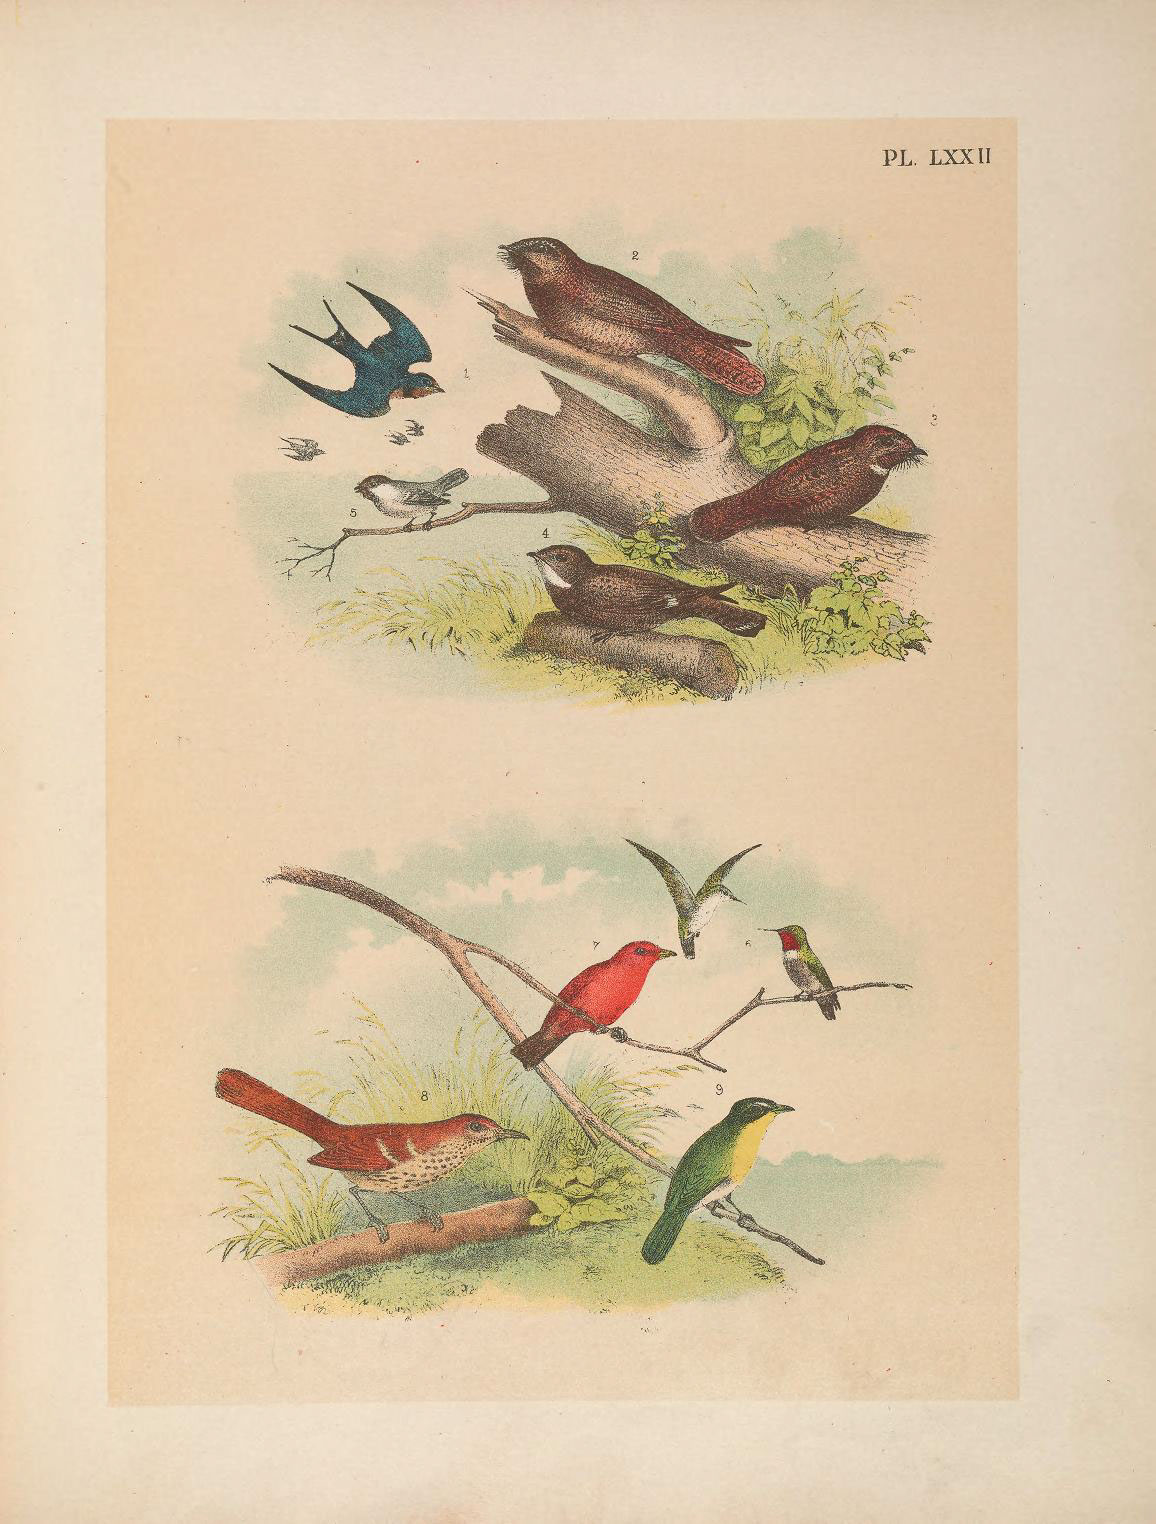 three different color drawings of birds, one red one blue